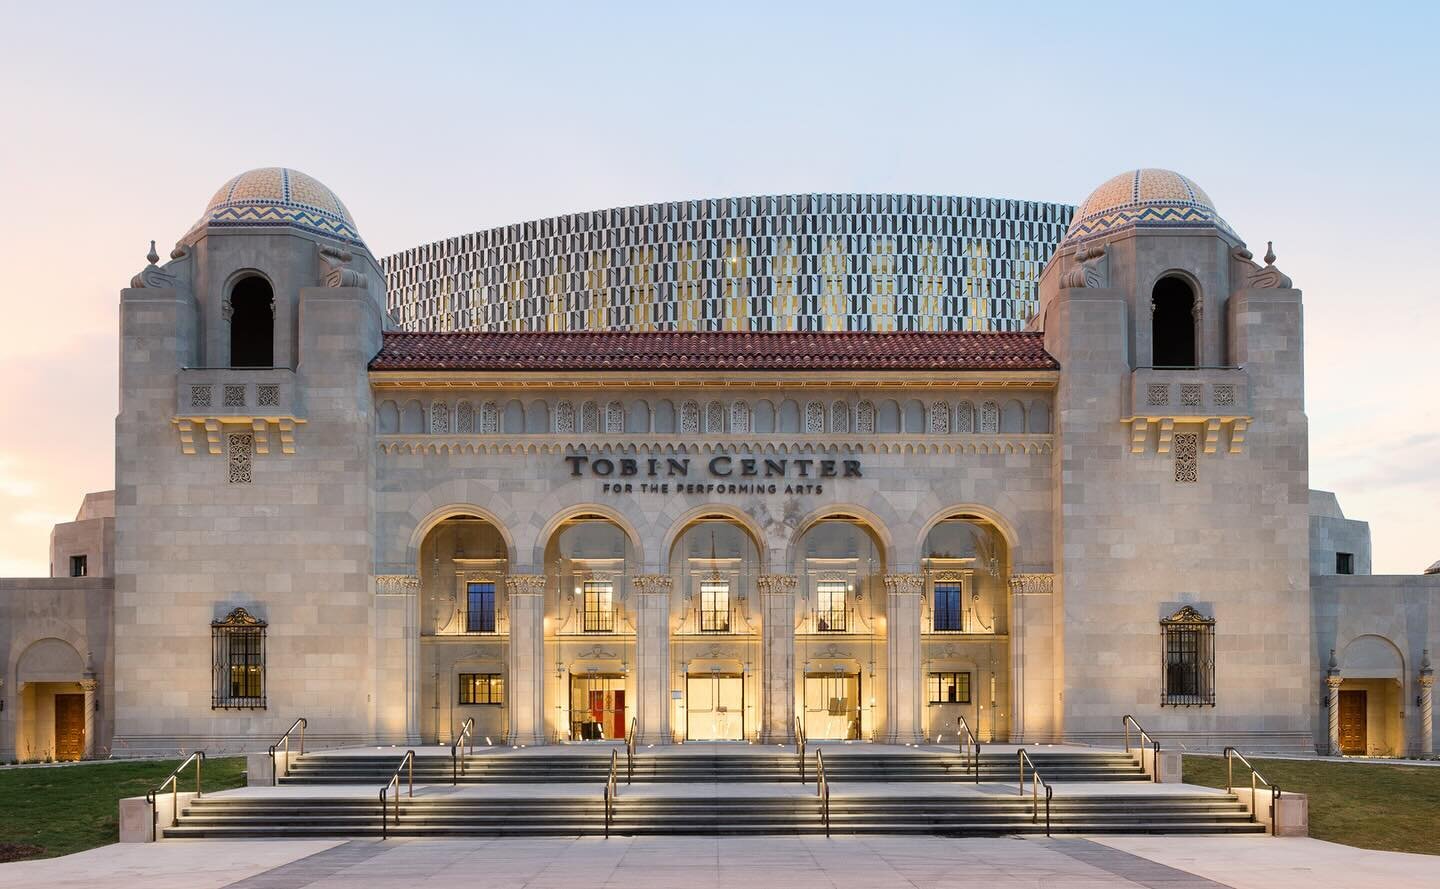 ⚠️ Class Update ⚠️ 

🥶 Due to chilly weather this weekend, our Saturday morning yoga class at @tobincentersa will take place INSIDE the Feik Rotunda. 

🥰 Come cozy up with your OMies on this FREE class starting at 9a. Signs will be provided onsite 